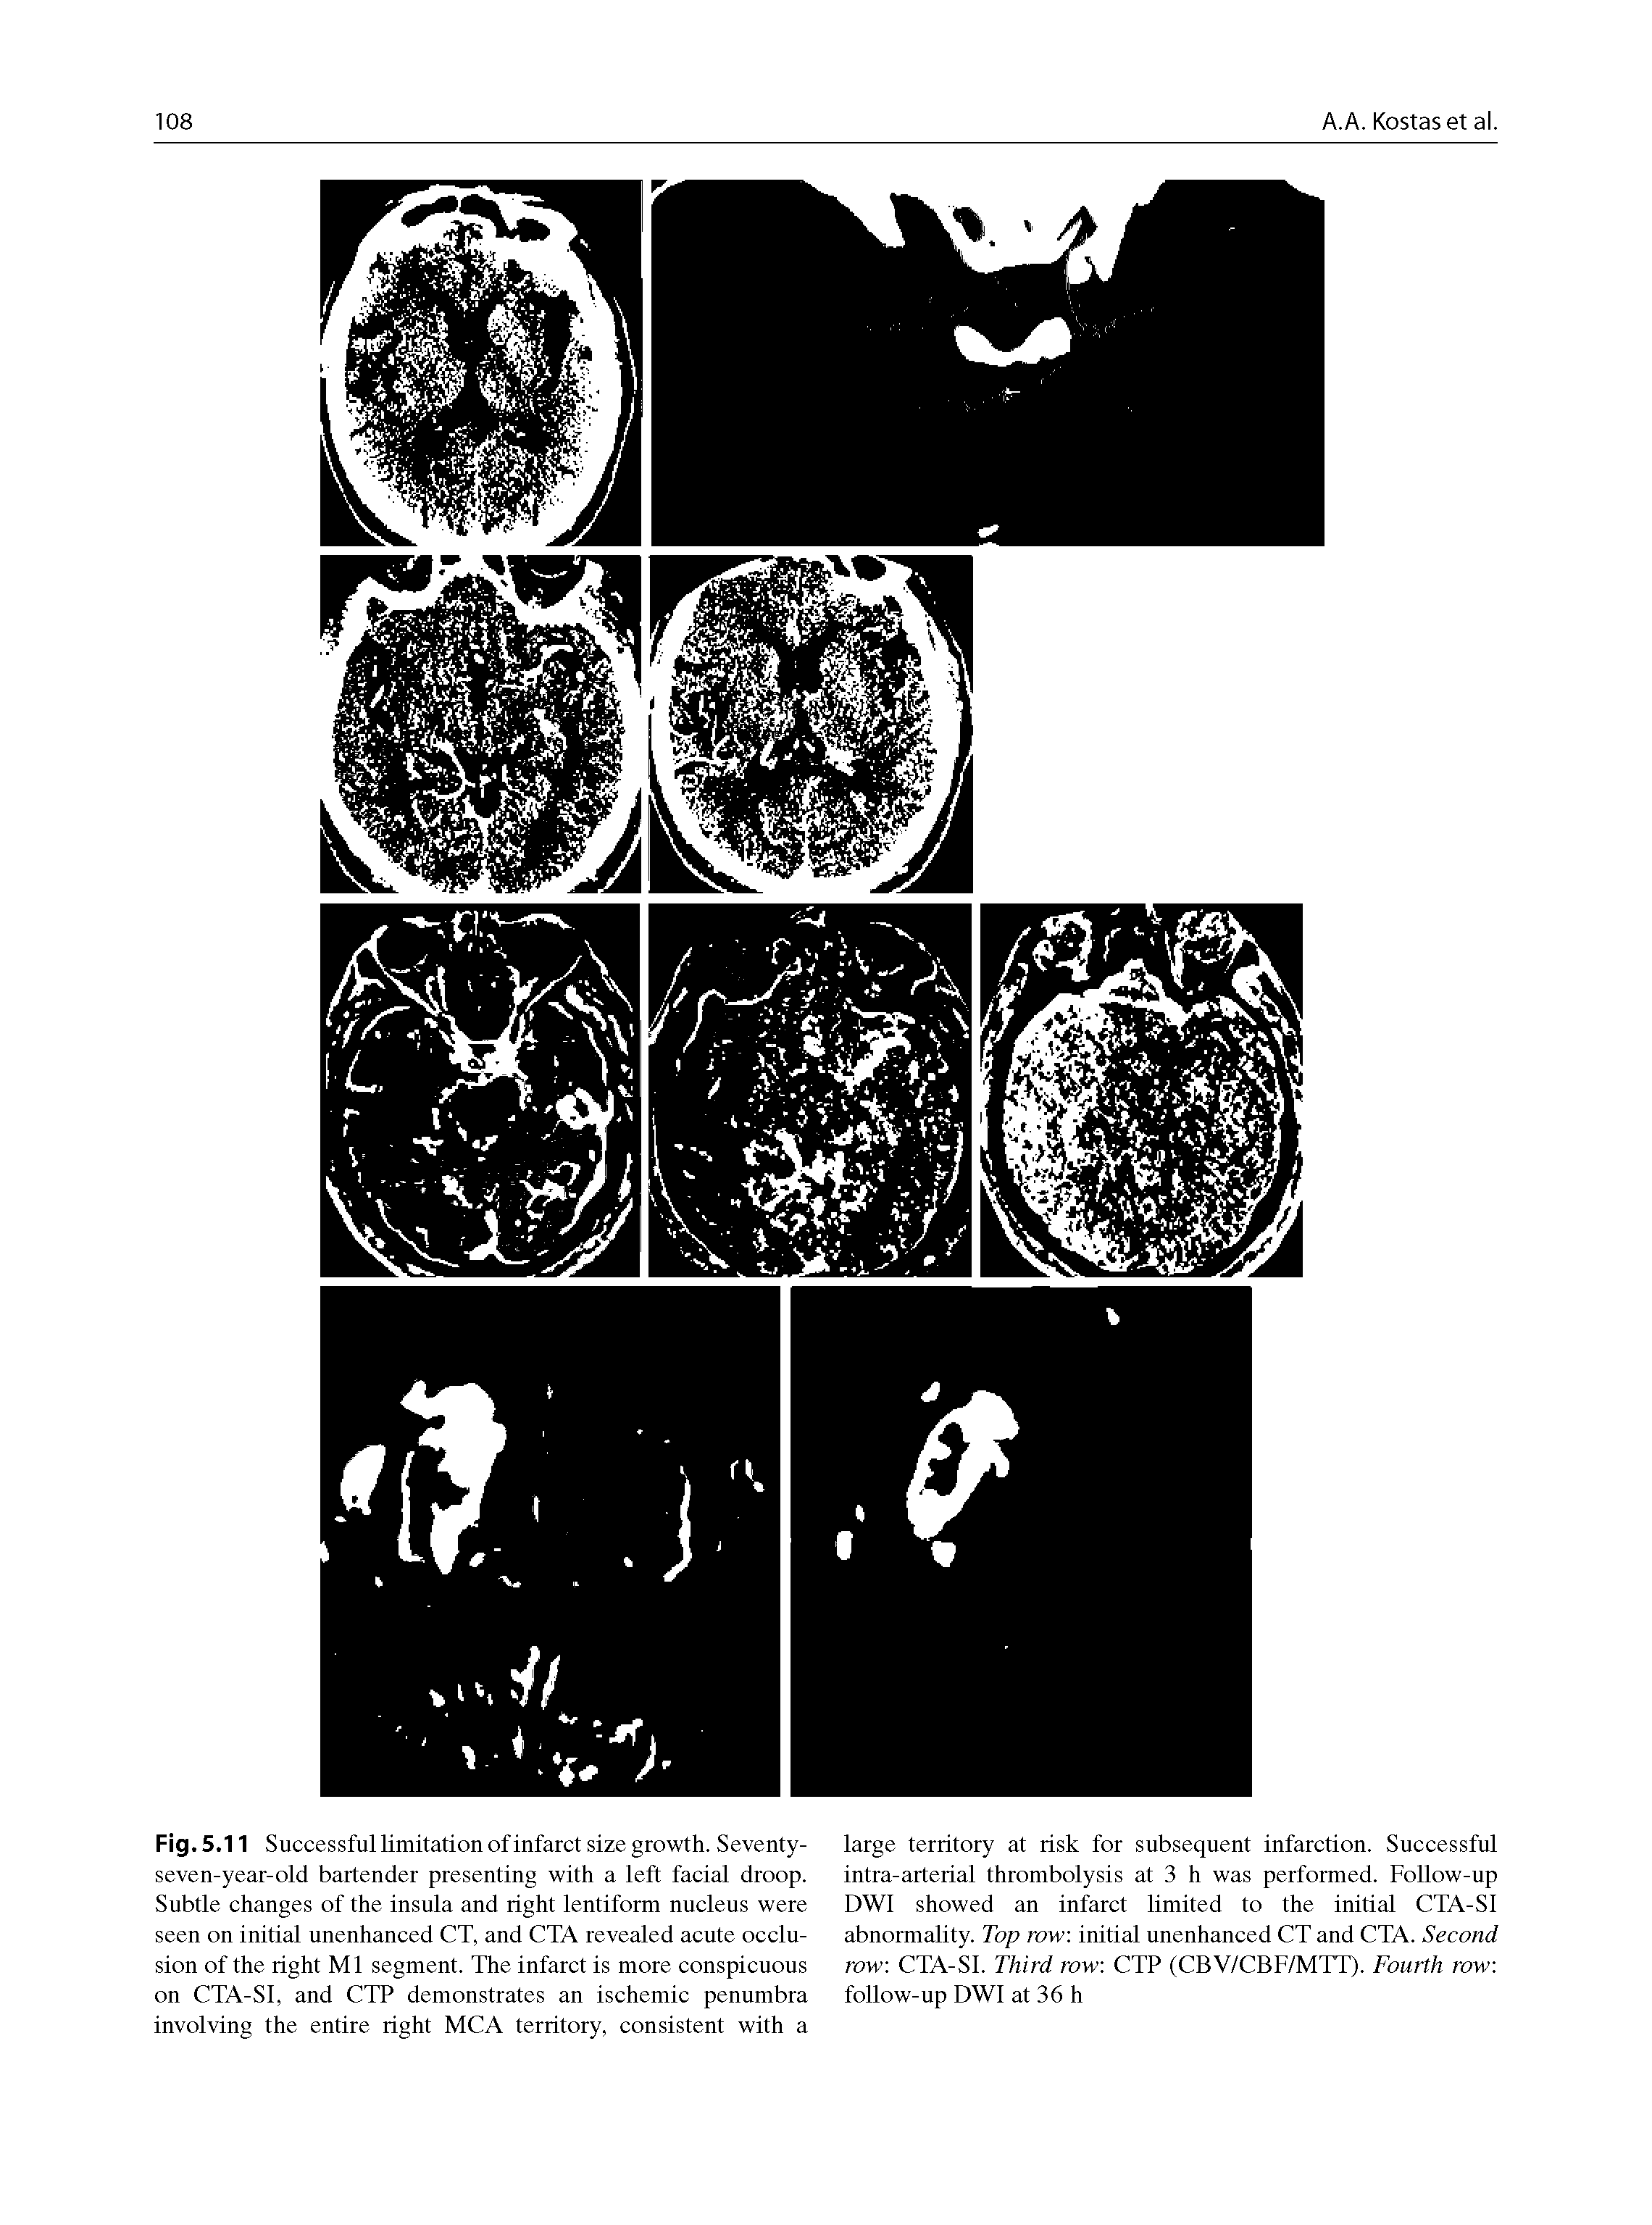 Fig.5.11 Successful limitation of infarct size growth. Seventy-seven-year-old bartender presenting with a left facial droop. Subtle changes of the insula and right lentiform nucleus were seen on initial unenhanced CT, and CTA revealed acute occlusion of the right Ml segment. The infarct is more conspicuous on CTA-SI, and CTP demonstrates an ischemic penumbra involving the entire right MCA territory, consistent with a...